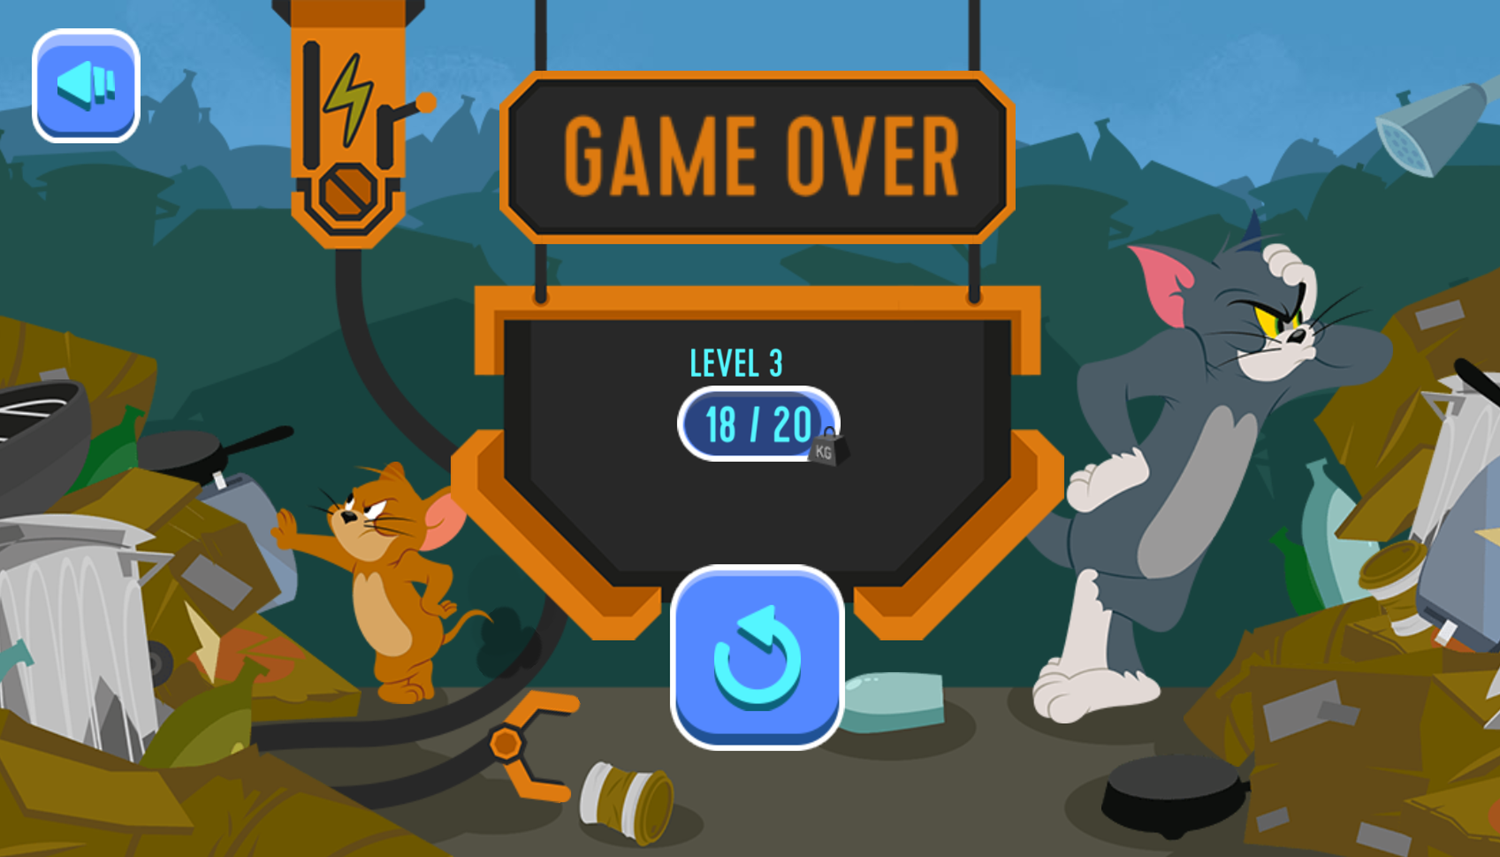 Tom and Jerry River Recycle Game Over Screenshot.